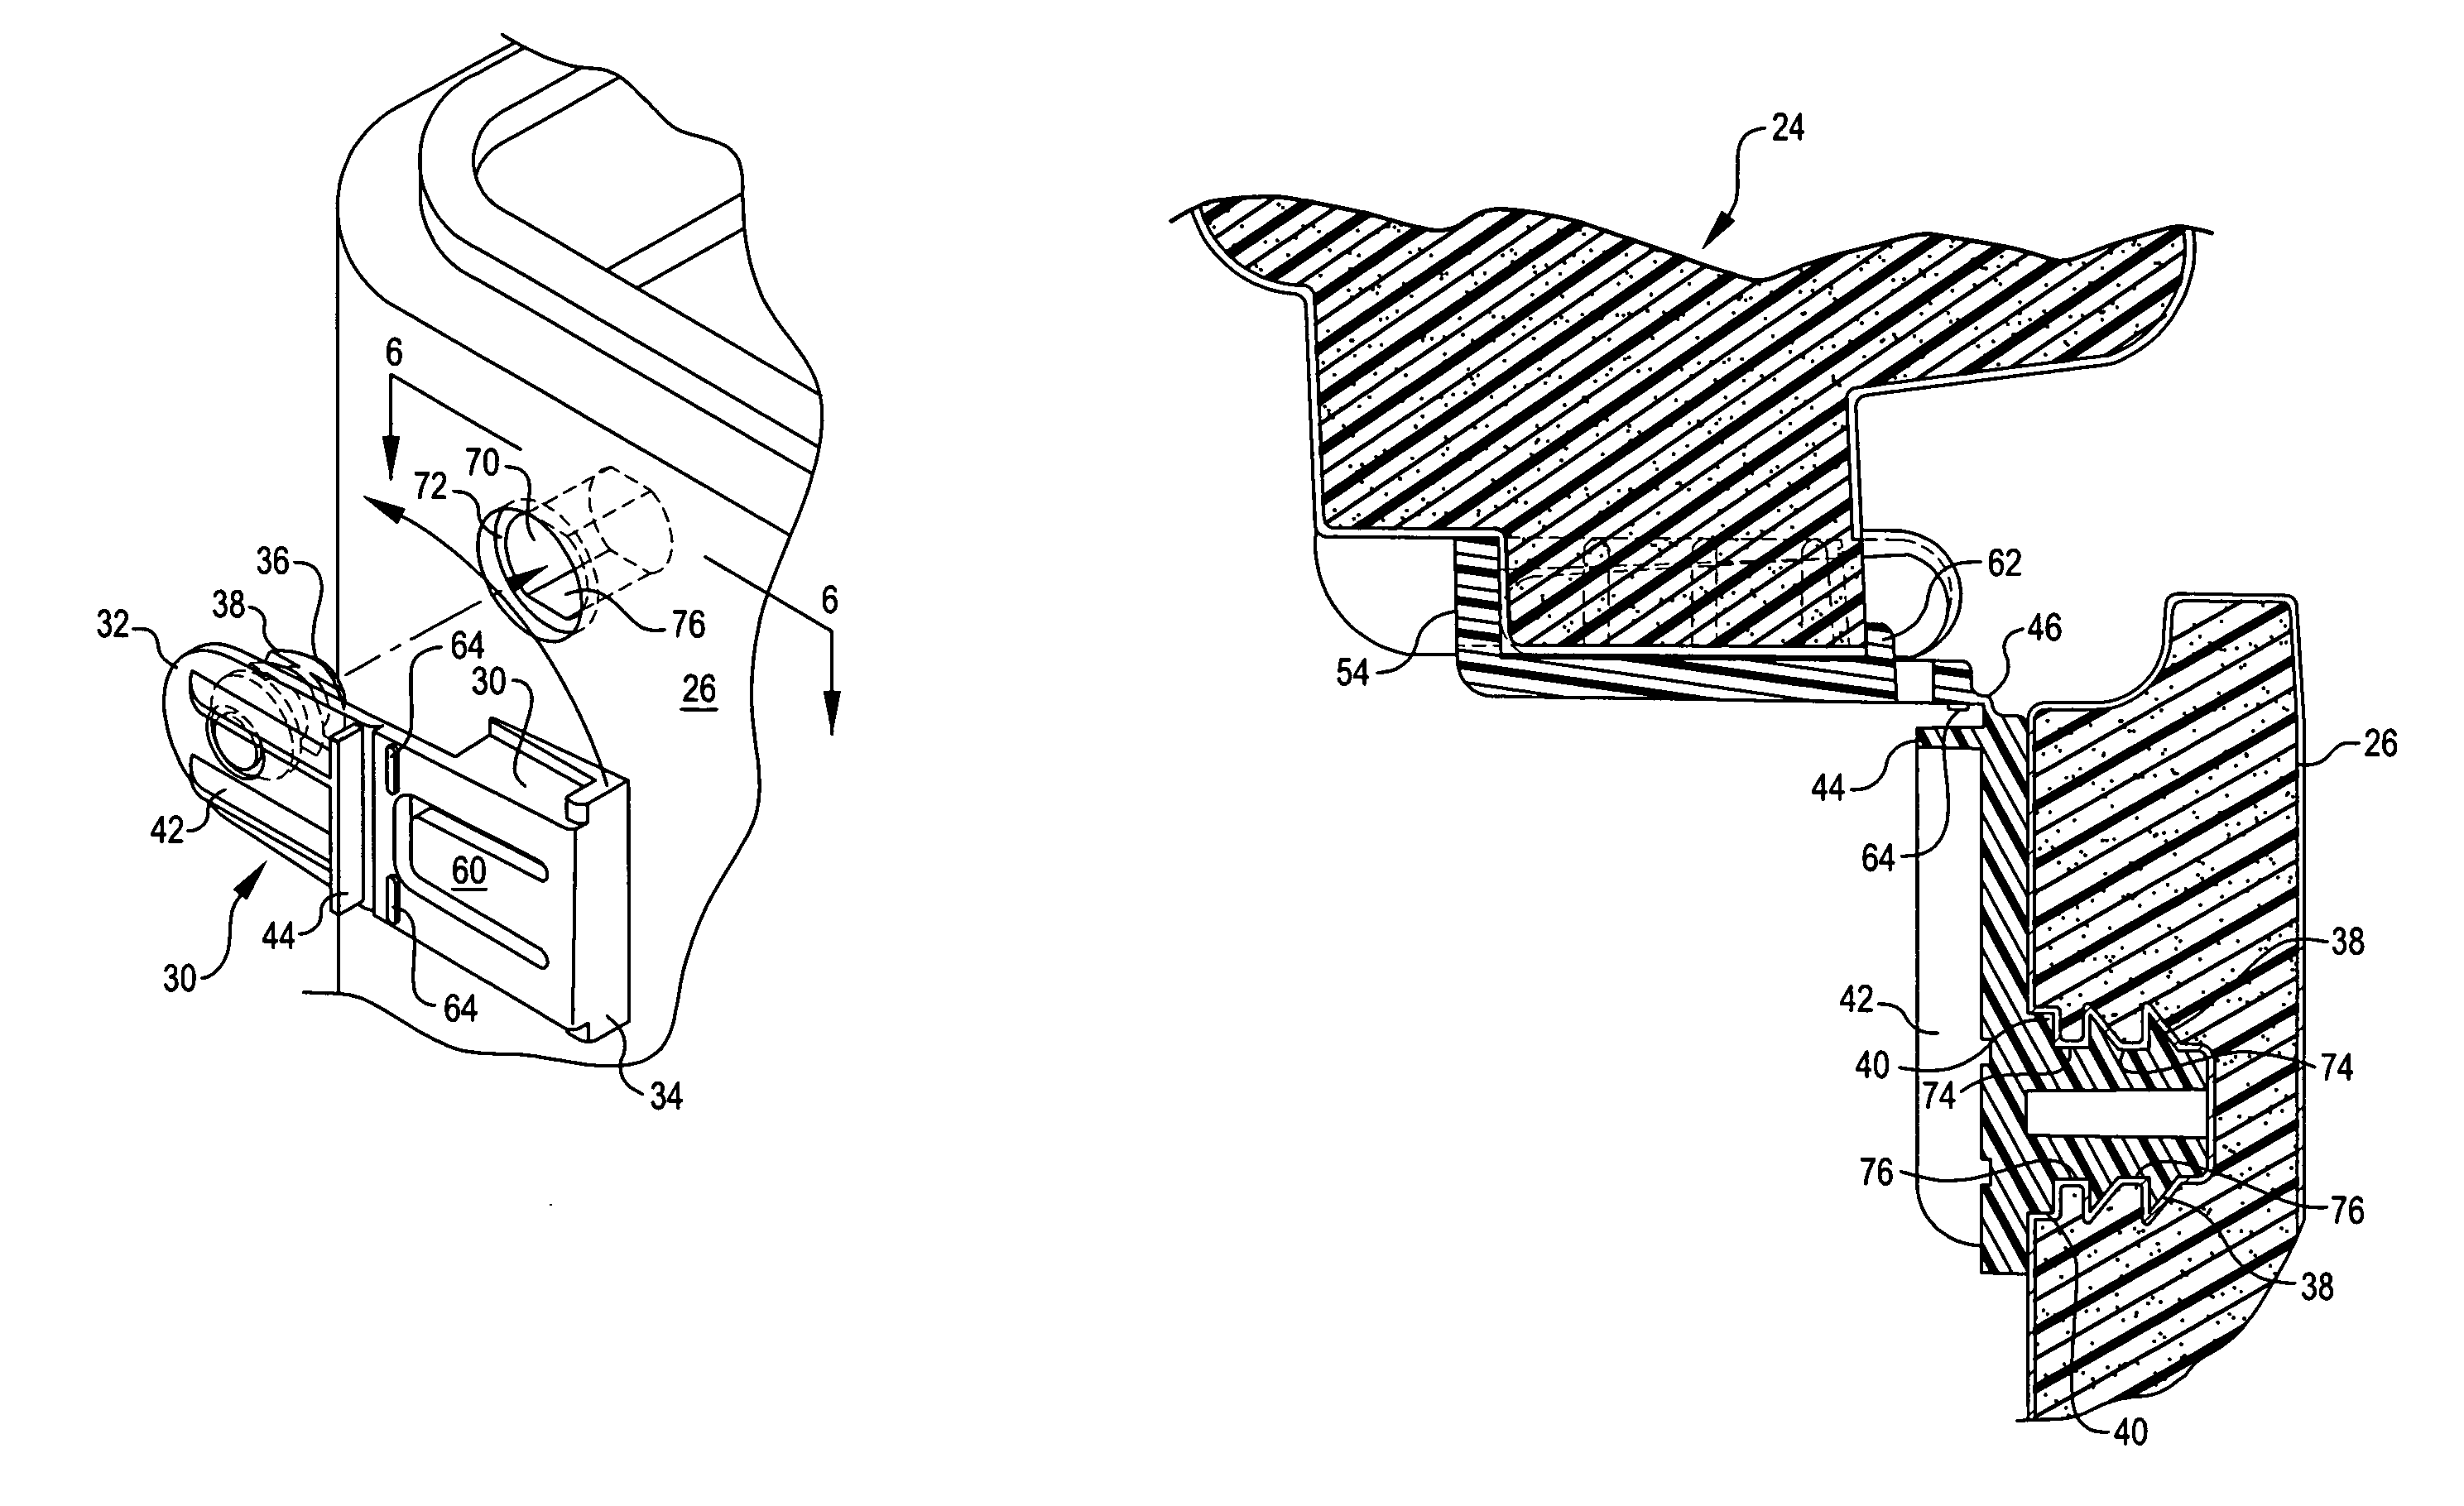 Method and apparatus for attaching a lid to an insulated container